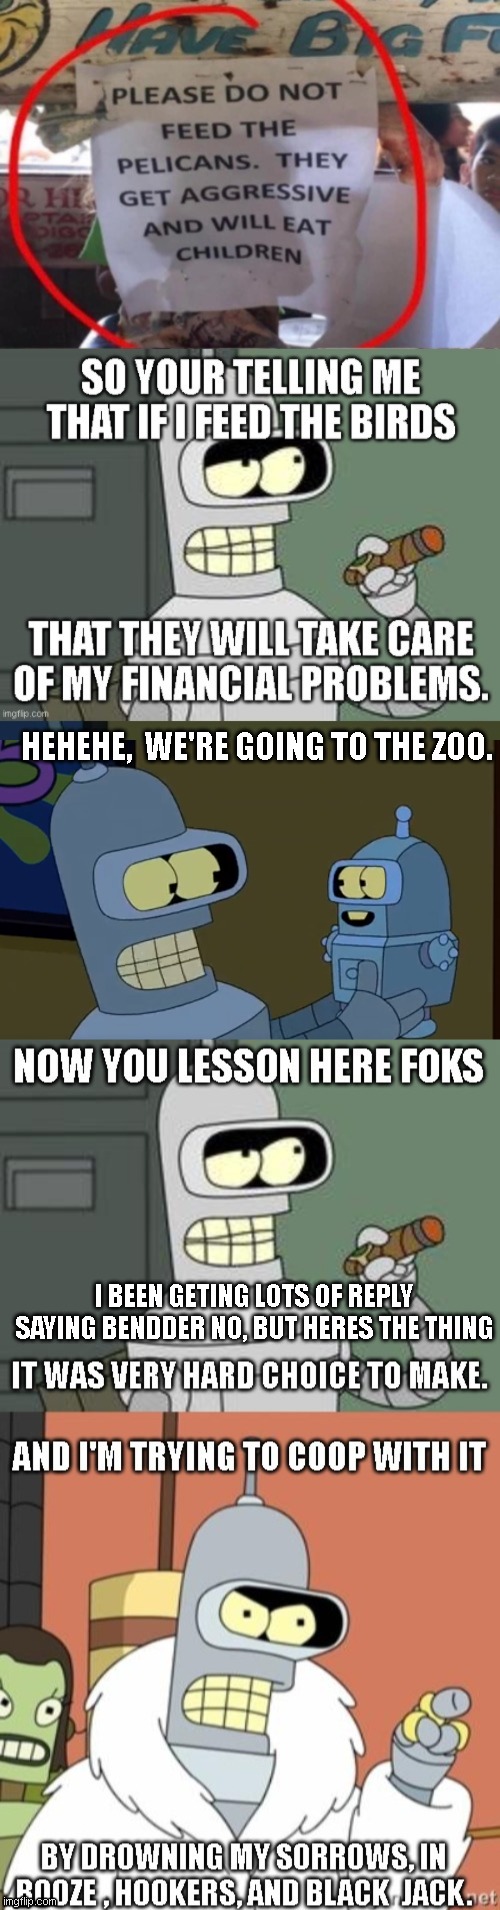 bender is a bad parant | HEHEHE,  WE'RE GOING TO THE ZOO. I BEEN GETING LOTS OF REPLY SAYING BENDDER NO, BUT HERES THE THING | image tagged in children,funny,bender,zoo,eating | made w/ Imgflip meme maker